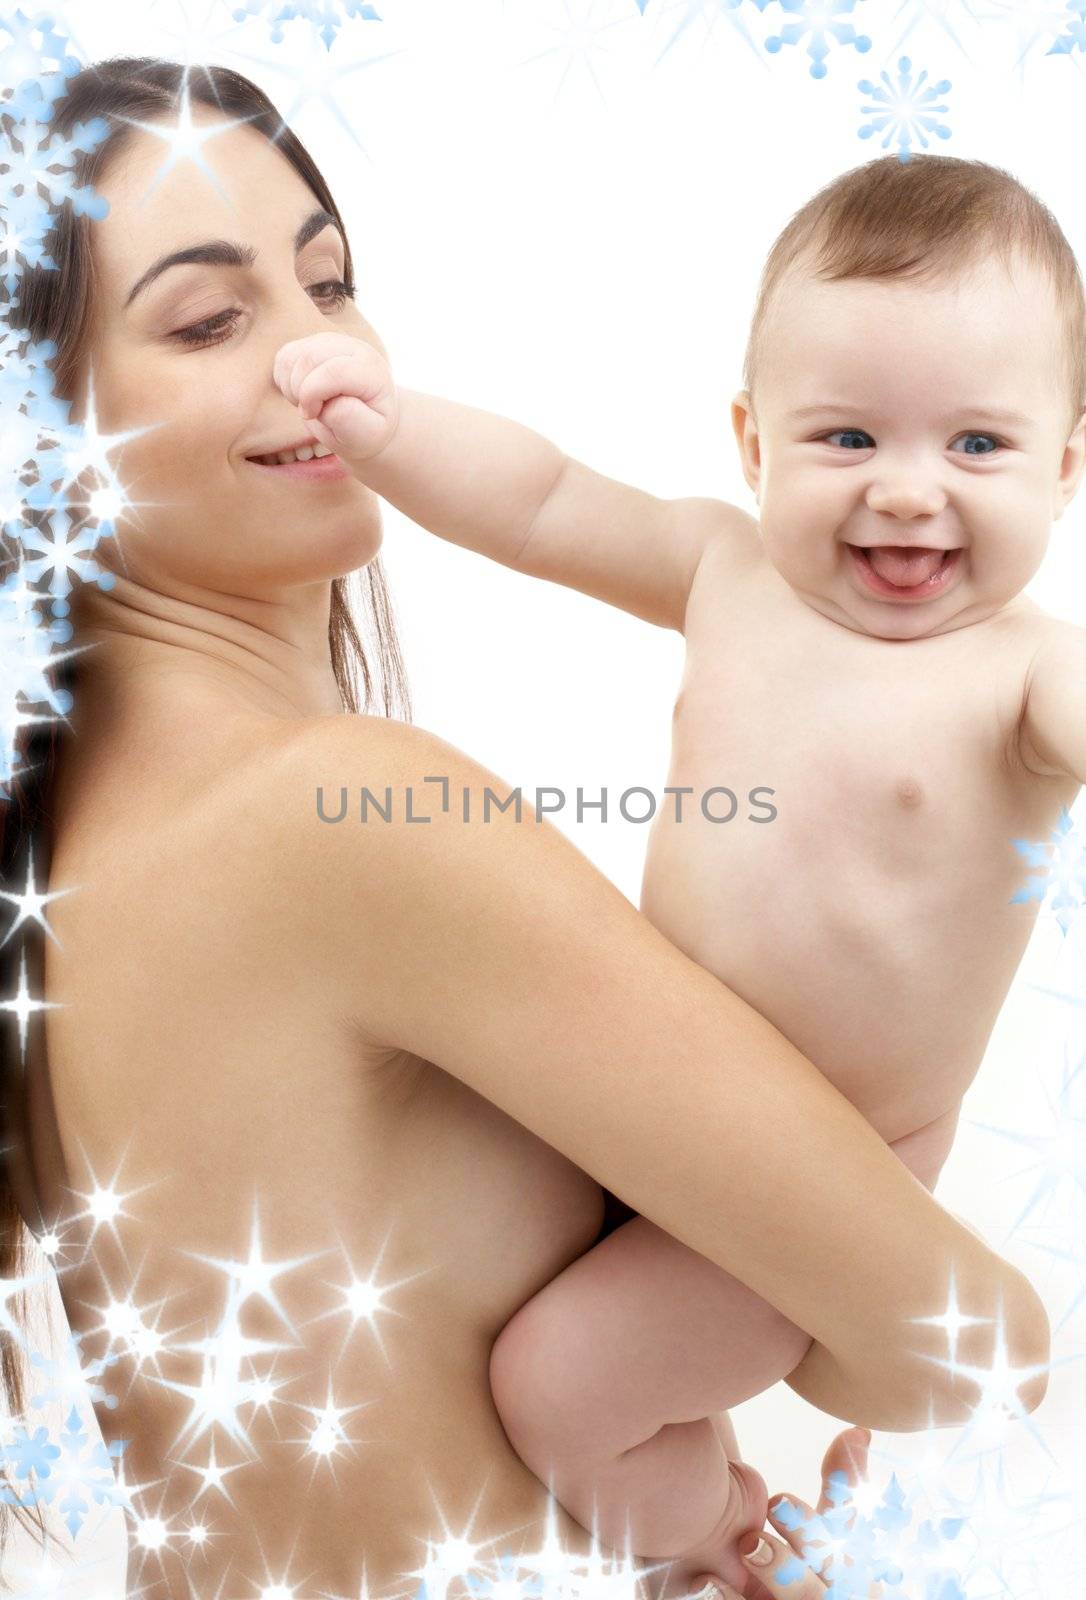 picture of happy mother with baby and snowflakes